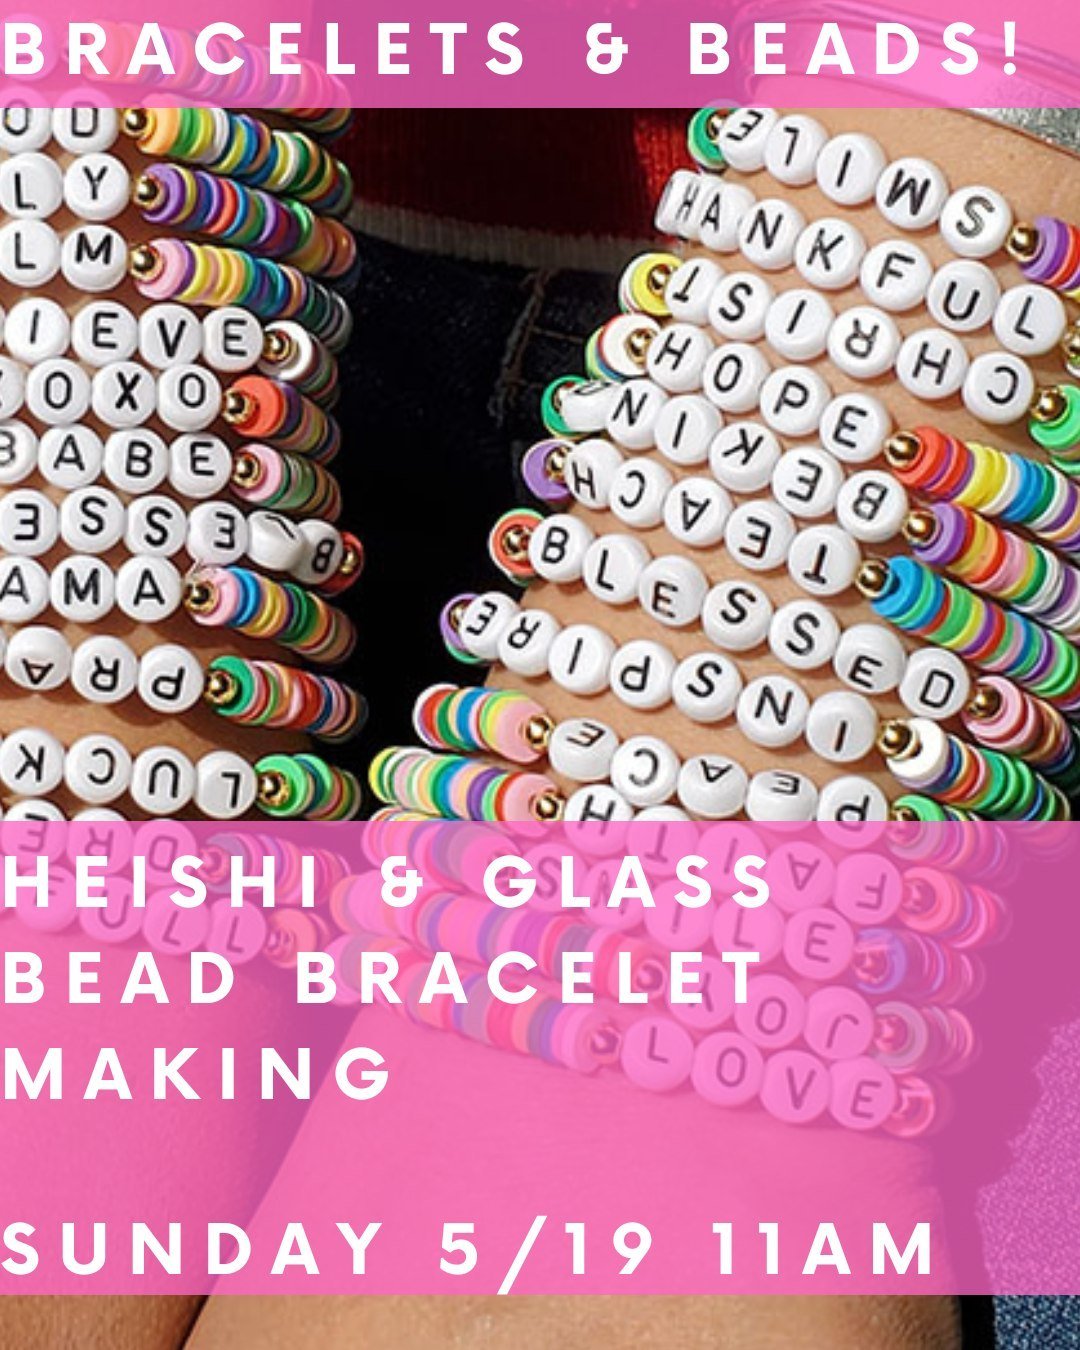 🌟 Bracelet Making Sunday Alert! 🌟⁠
⁠
Grab your friends and get those creative vibes flowing! Join us this Sunday, May 19th at 11 am for a bracelet-making session for all ages. 🎉🌈⁠
⁠
Whether you're a pro at crafting or just starting out, this even